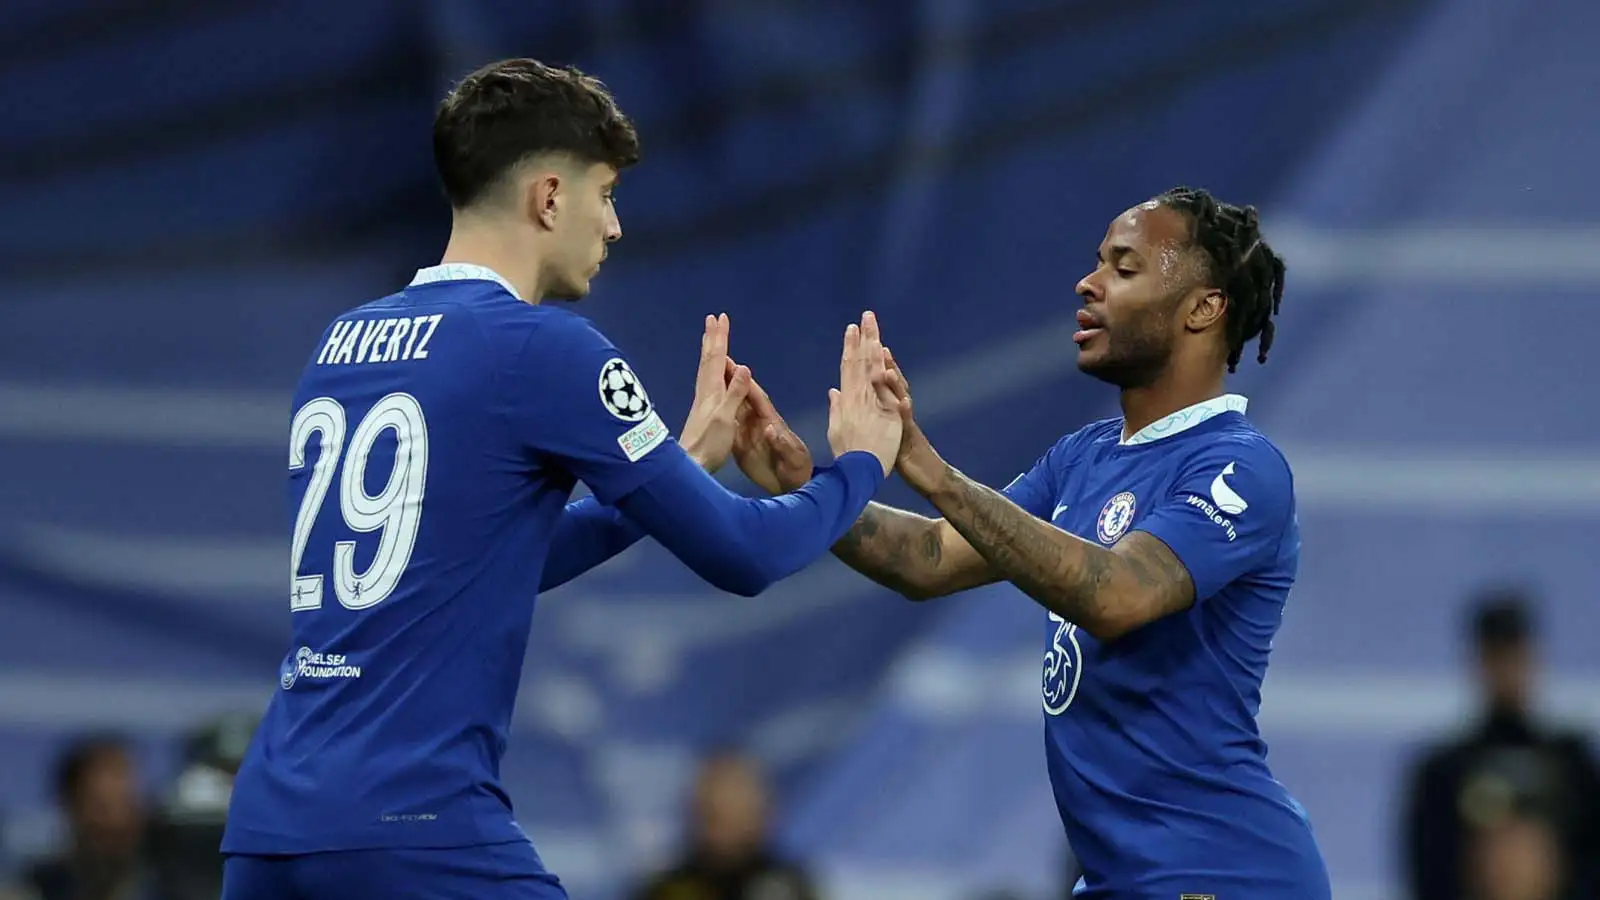 Chelsea's Raheem Sterling (right) is replaced by substitute Kai Havertz during the UEFA Champions League quarter-final first leg match at the Santiago Bernabeu Stadium